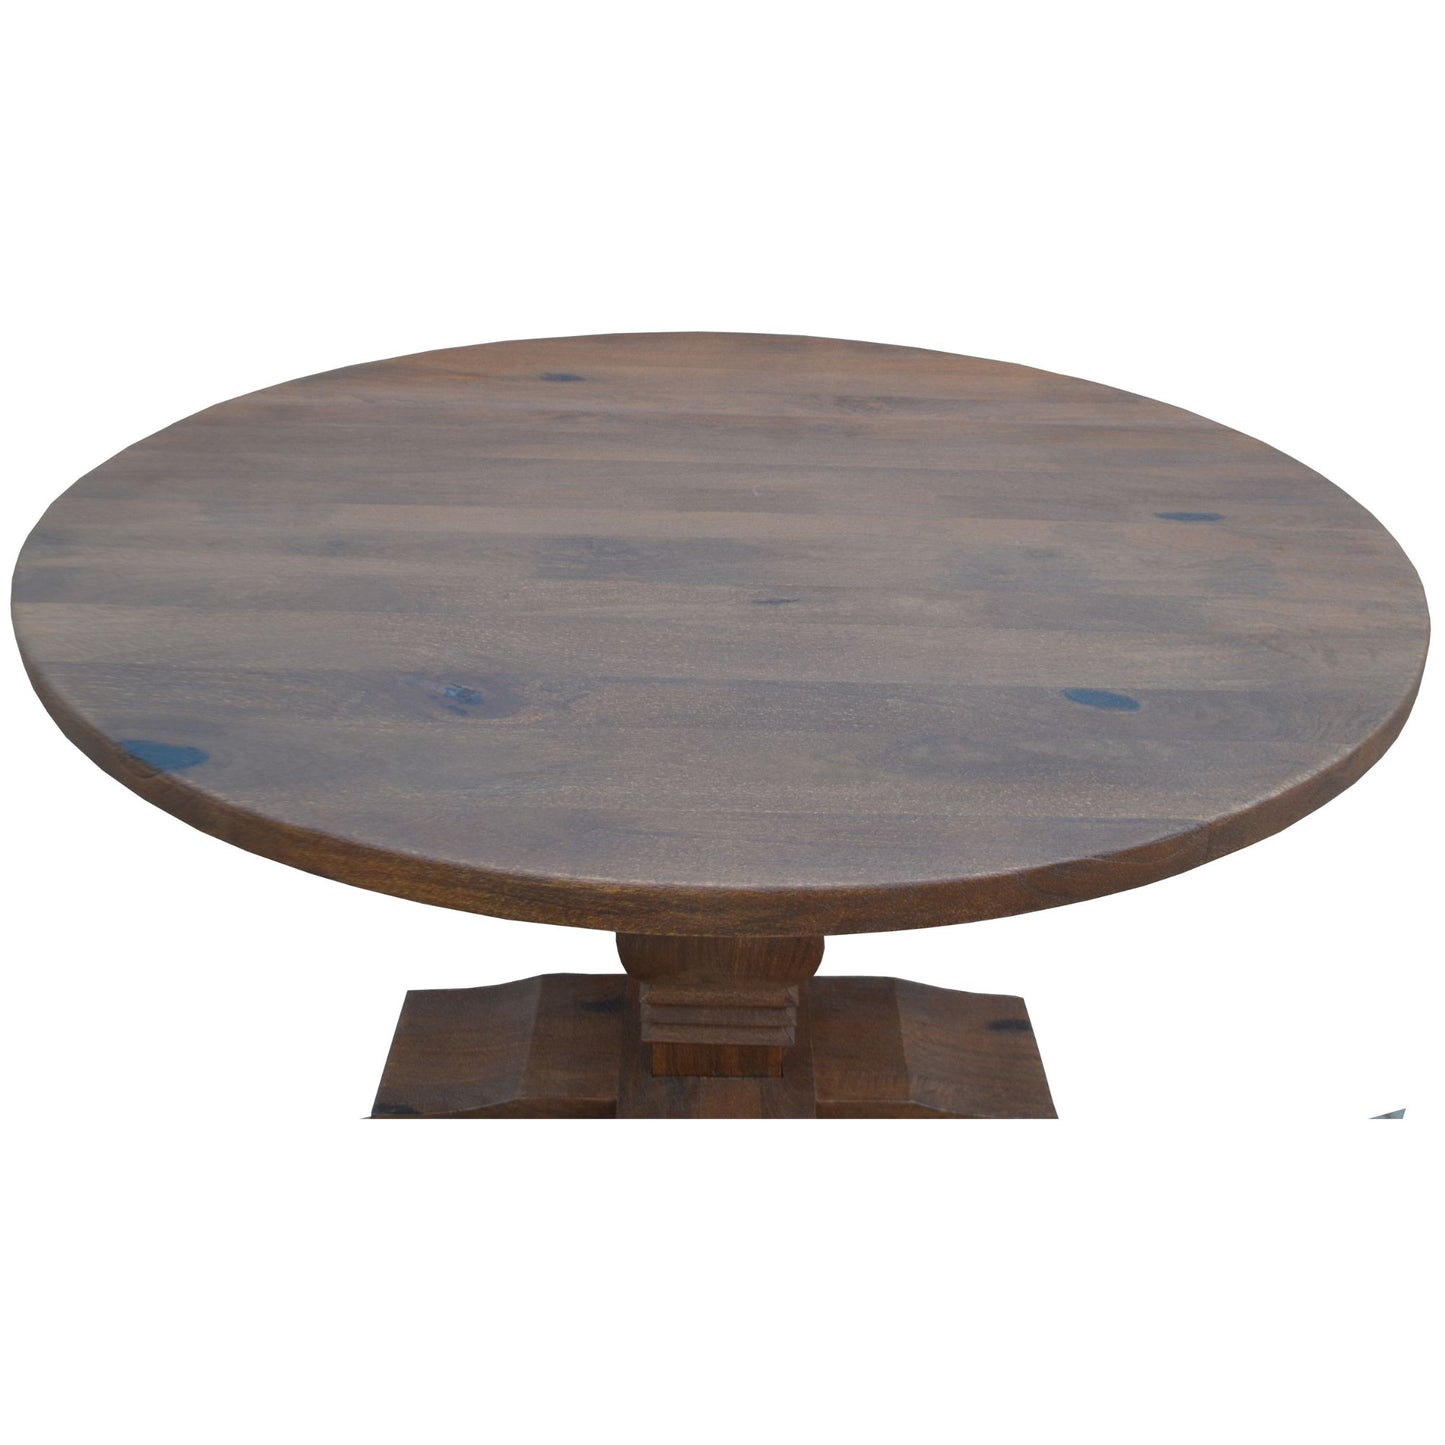 Florence 5pc French Provincial Round Dining Table 135cm